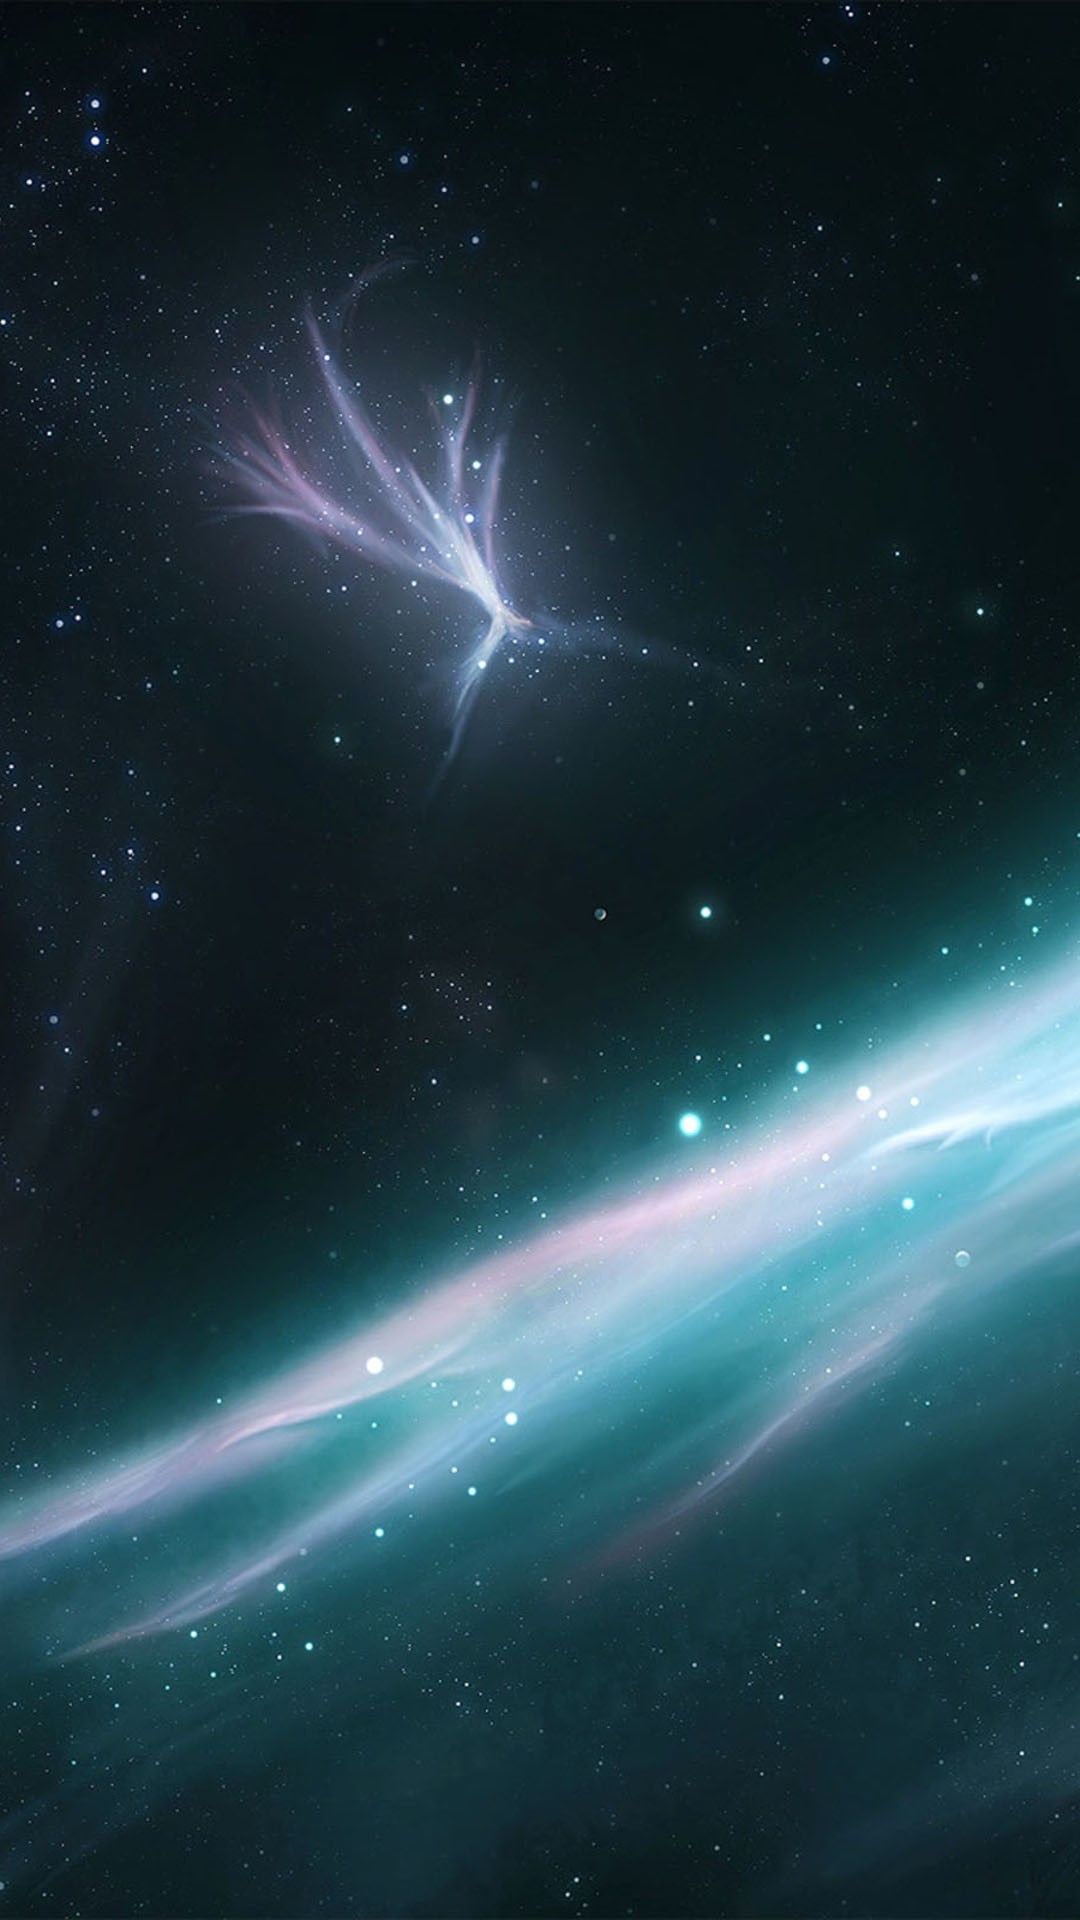 Great abstract space HD Samsung smartphone wallpaper